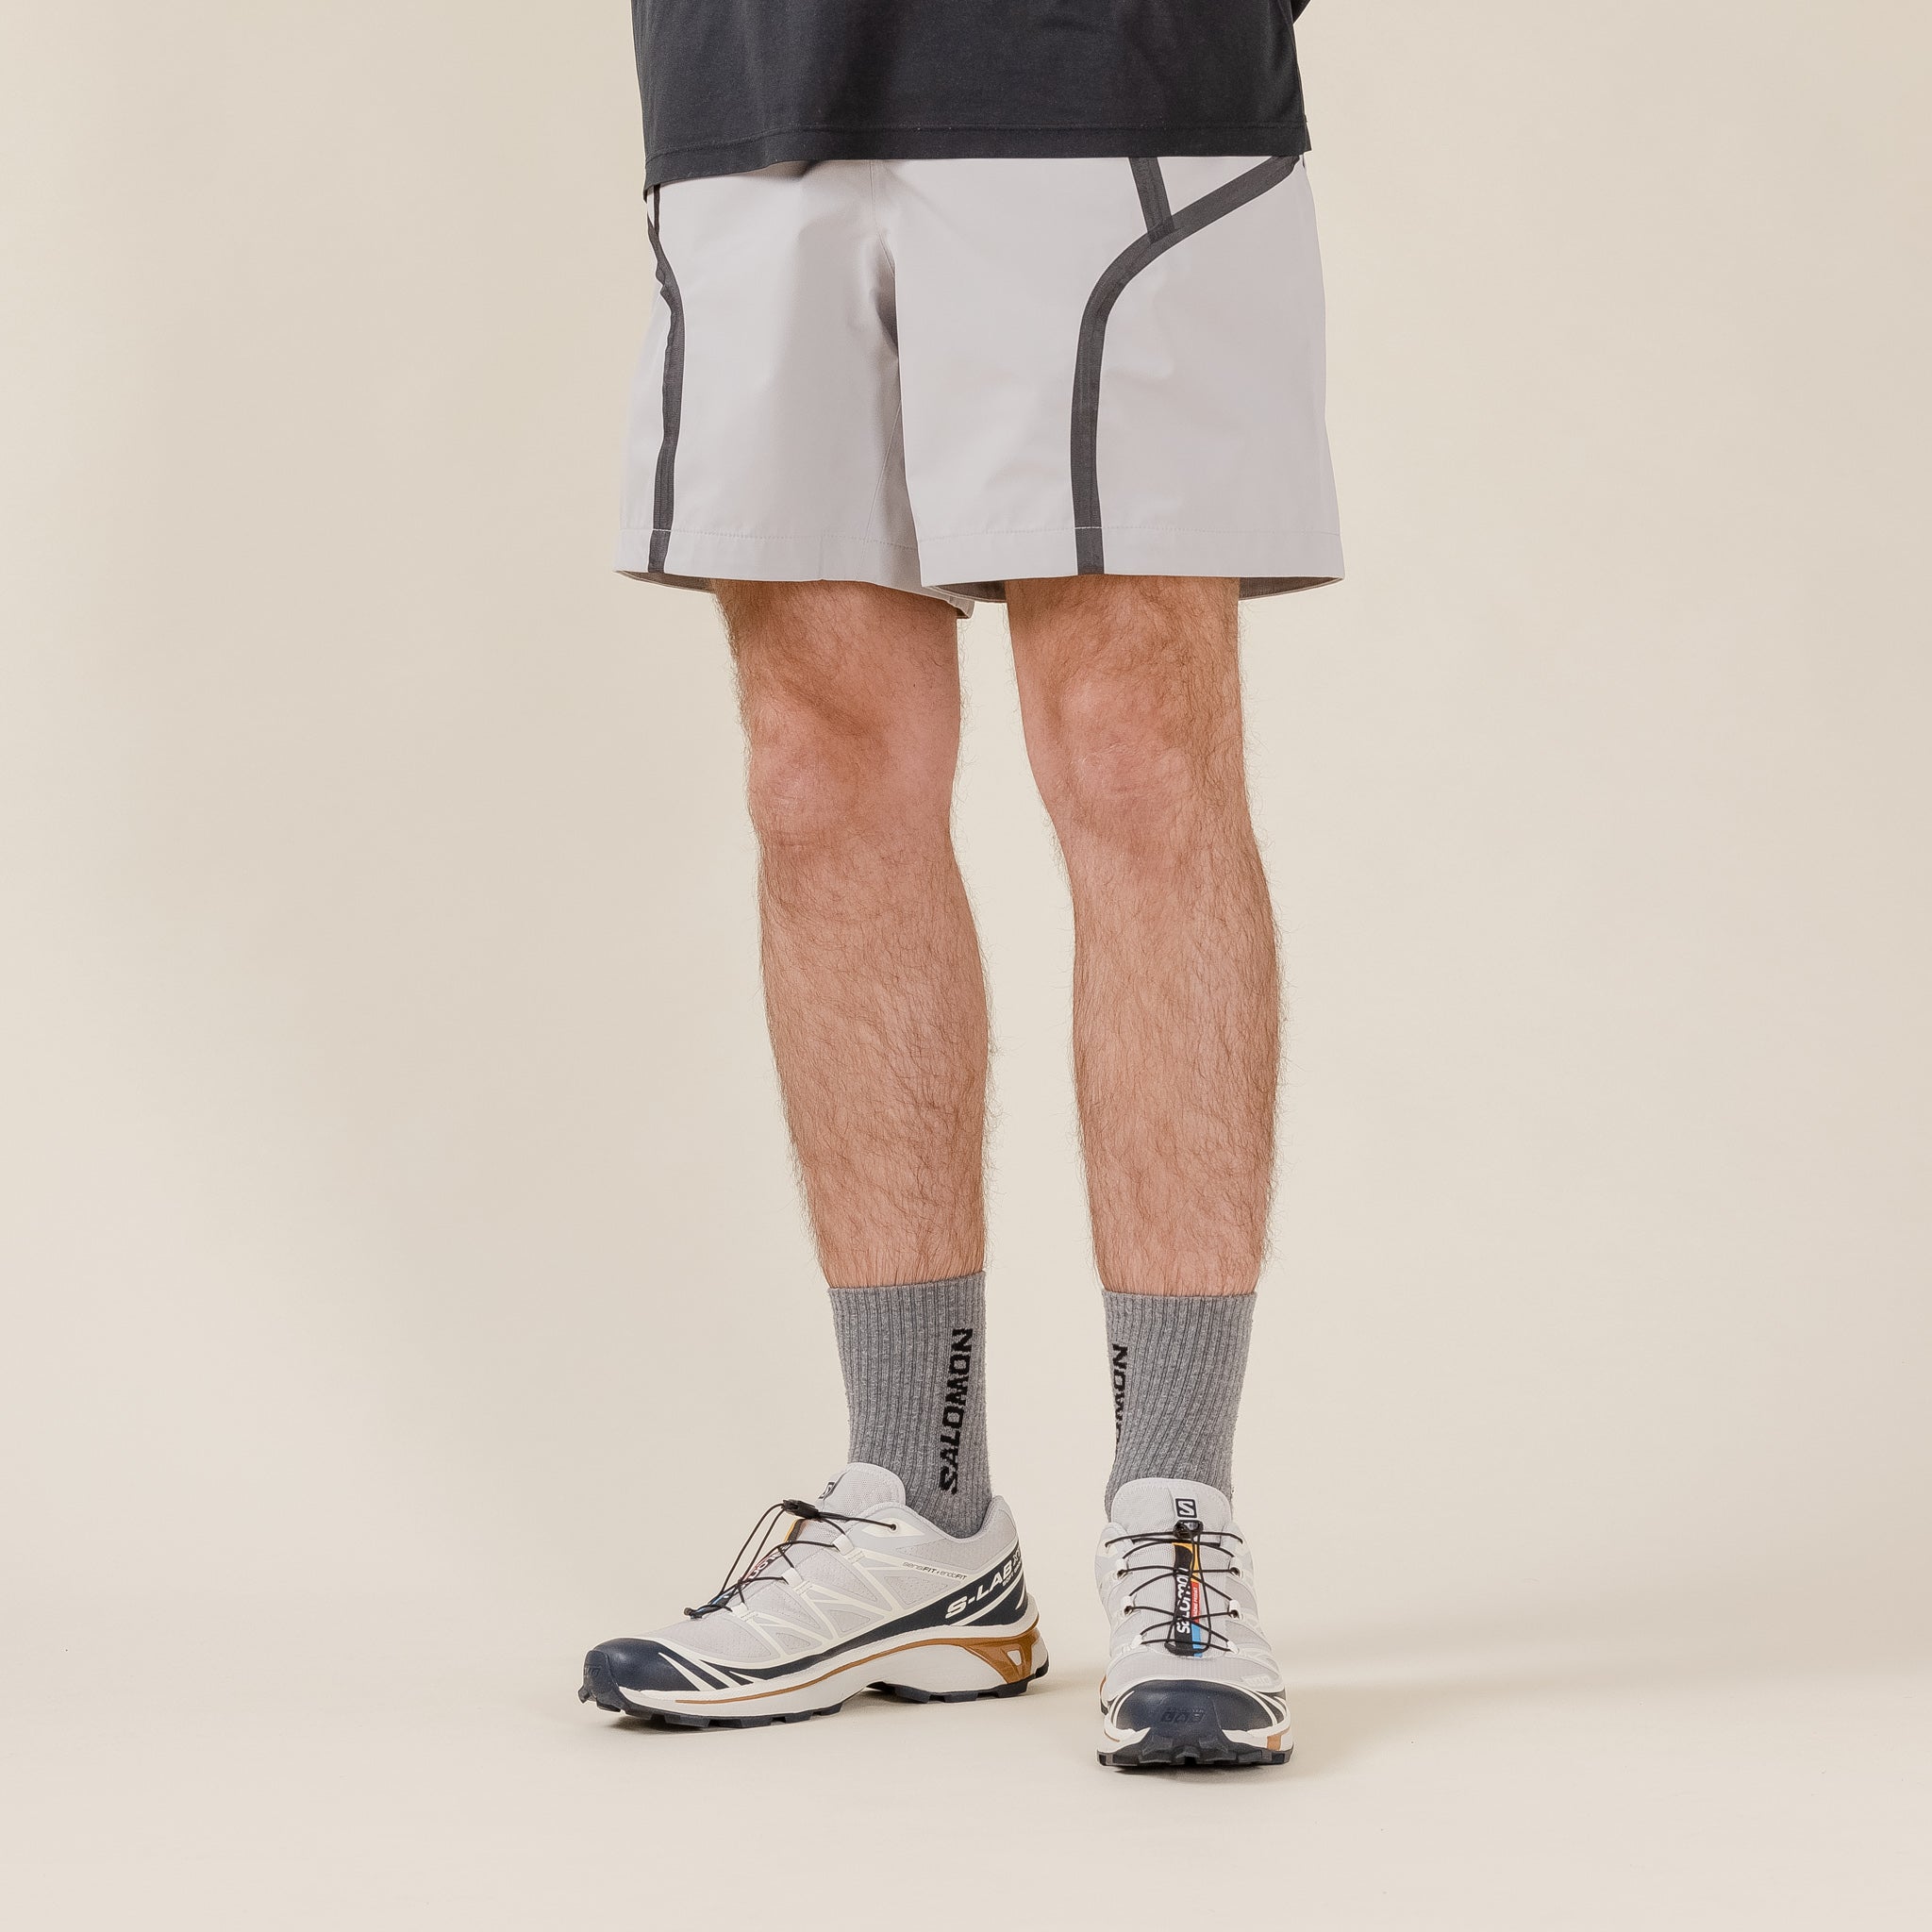 Welter Experiment - WSP001 Seam Sealed 3Layer Shorts - Grey "welter experiment stockists" "welter experiment uk" "welter experiment korea"